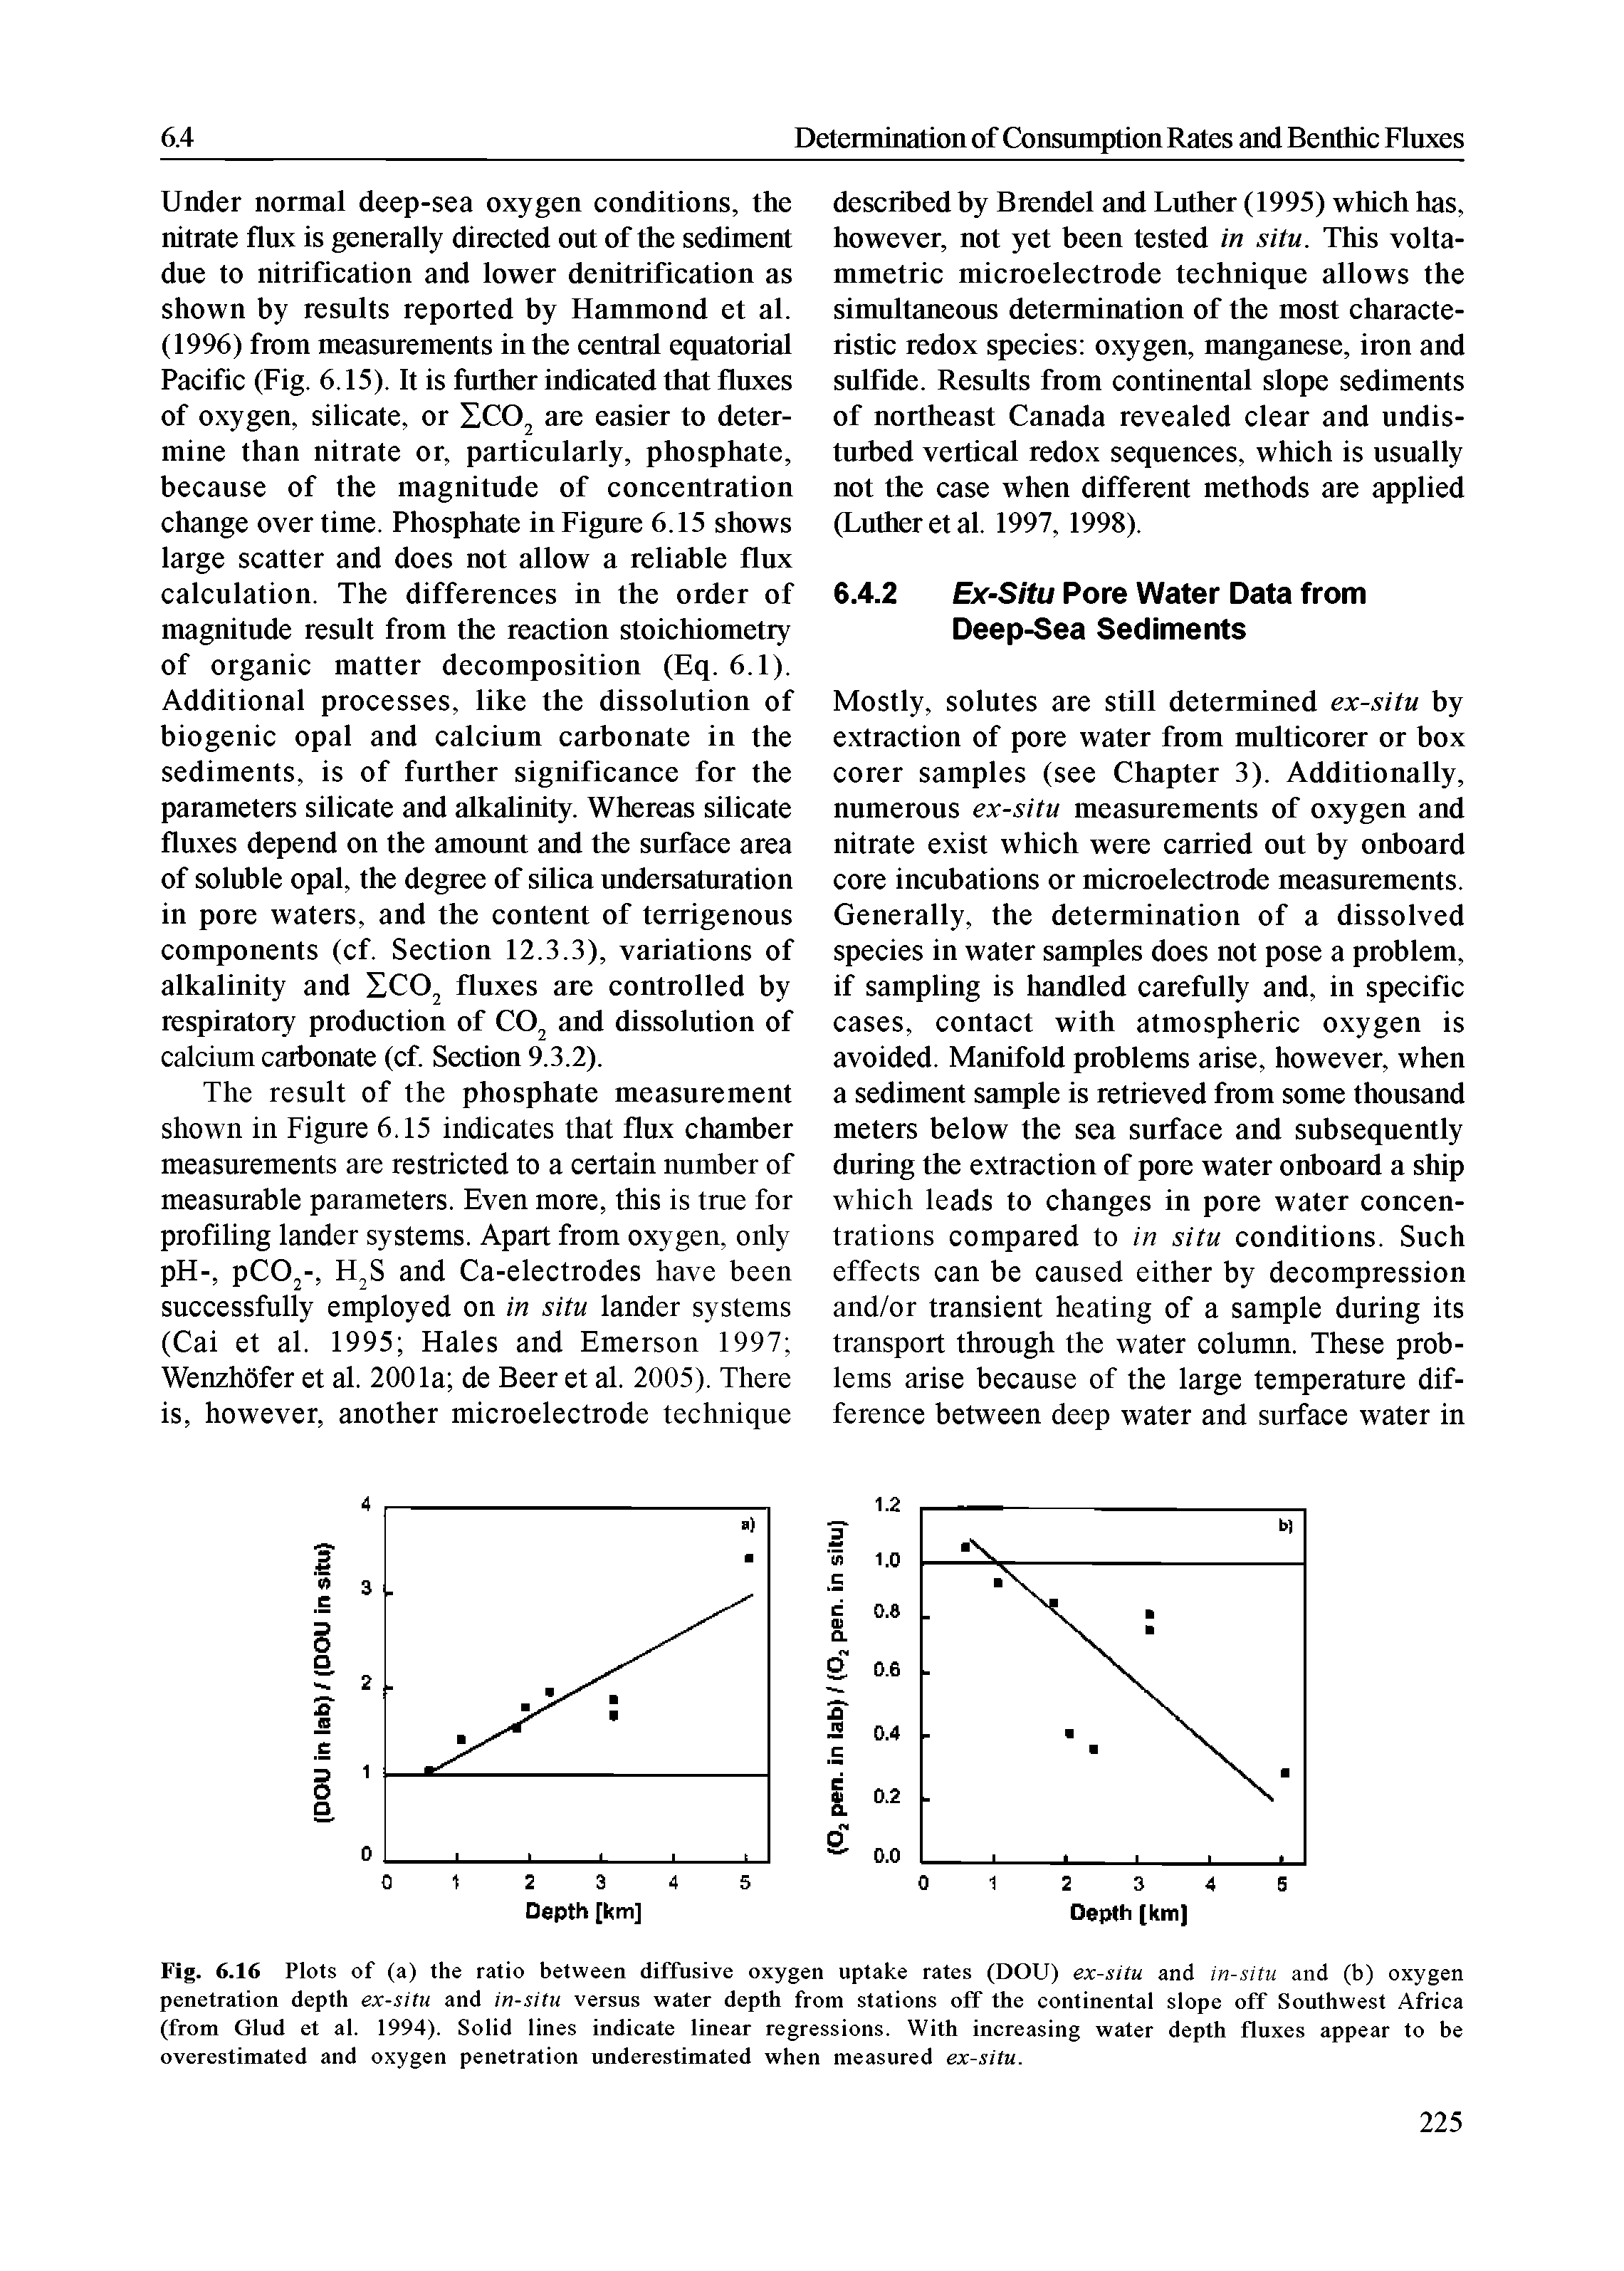 Fig. 6.16 Plots of (a) the ratio between diffusive oxygen uptake rates (DOU) ex-situ and in-situ and (b) oxygen penetration depth ex-situ and in-situ versus water depth from stations off the continental slope off Southwest Africa (from Glud et al. 1994). Solid lines indicate linear regressions. With increasing water depth fluxes appear to be overestimated and oxygen penetration underestimated when measured ex-situ.